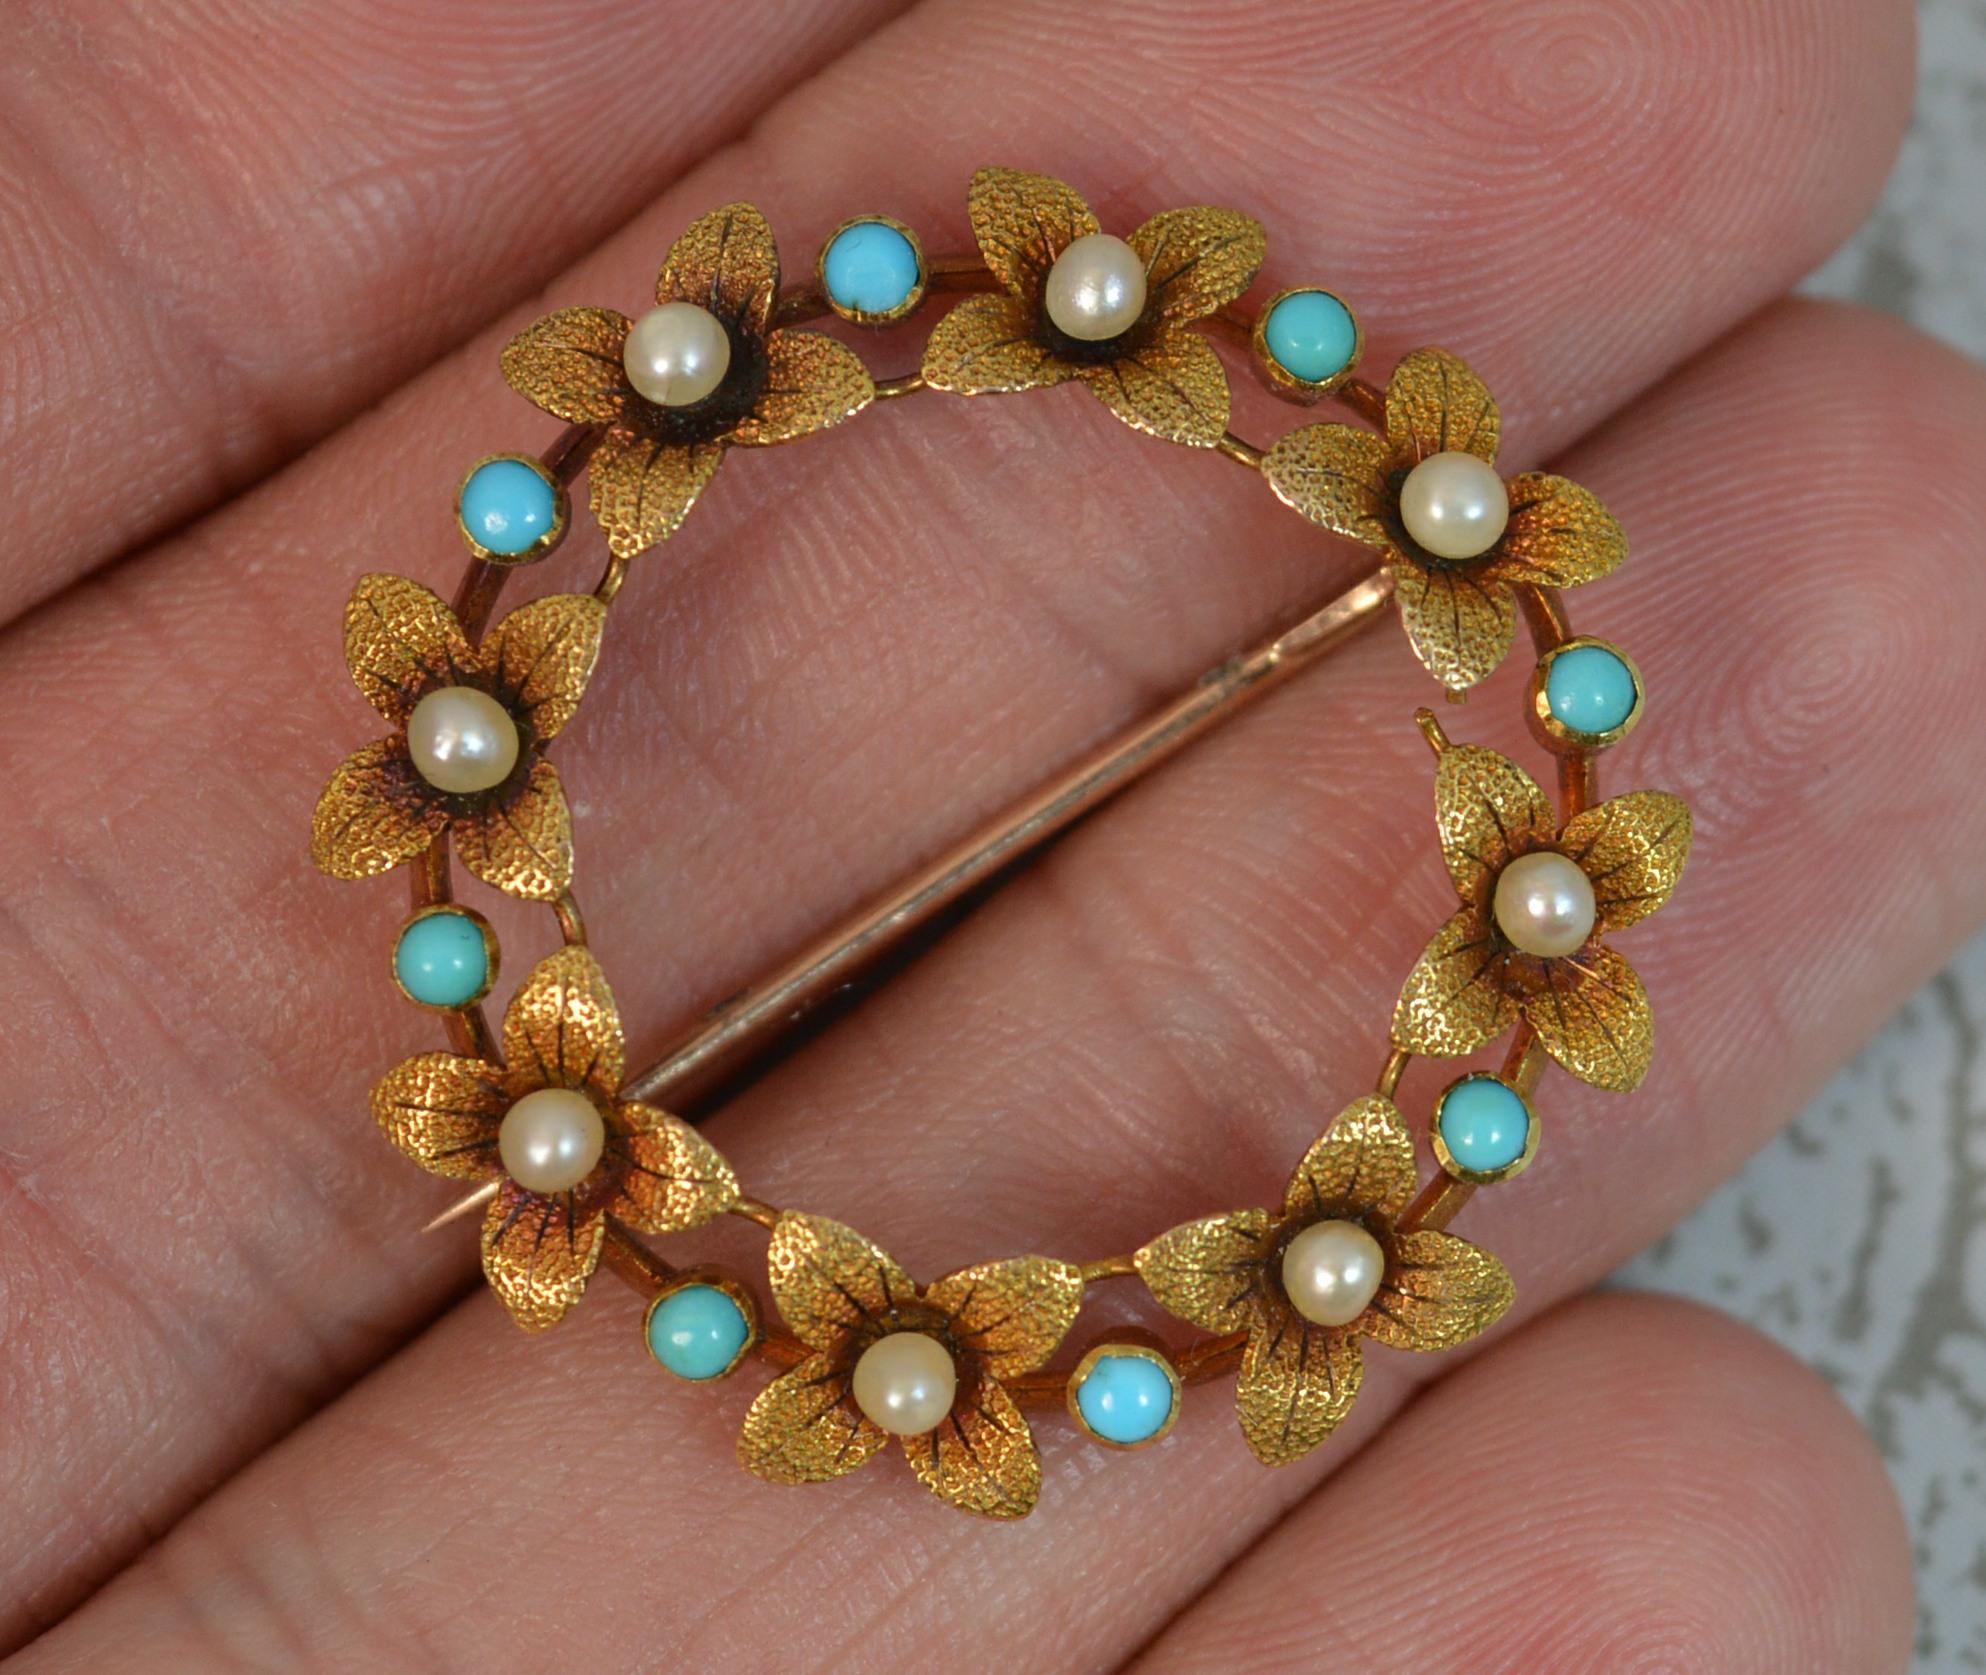 A superb quality late Victorian era brooch. Solid 15 carat gold example. Circular wreath like shape formed with flowers set with pearls to the centre and turquoise in between. Very finely made piece.

Condition ; Very good. Crisp pattern. Working